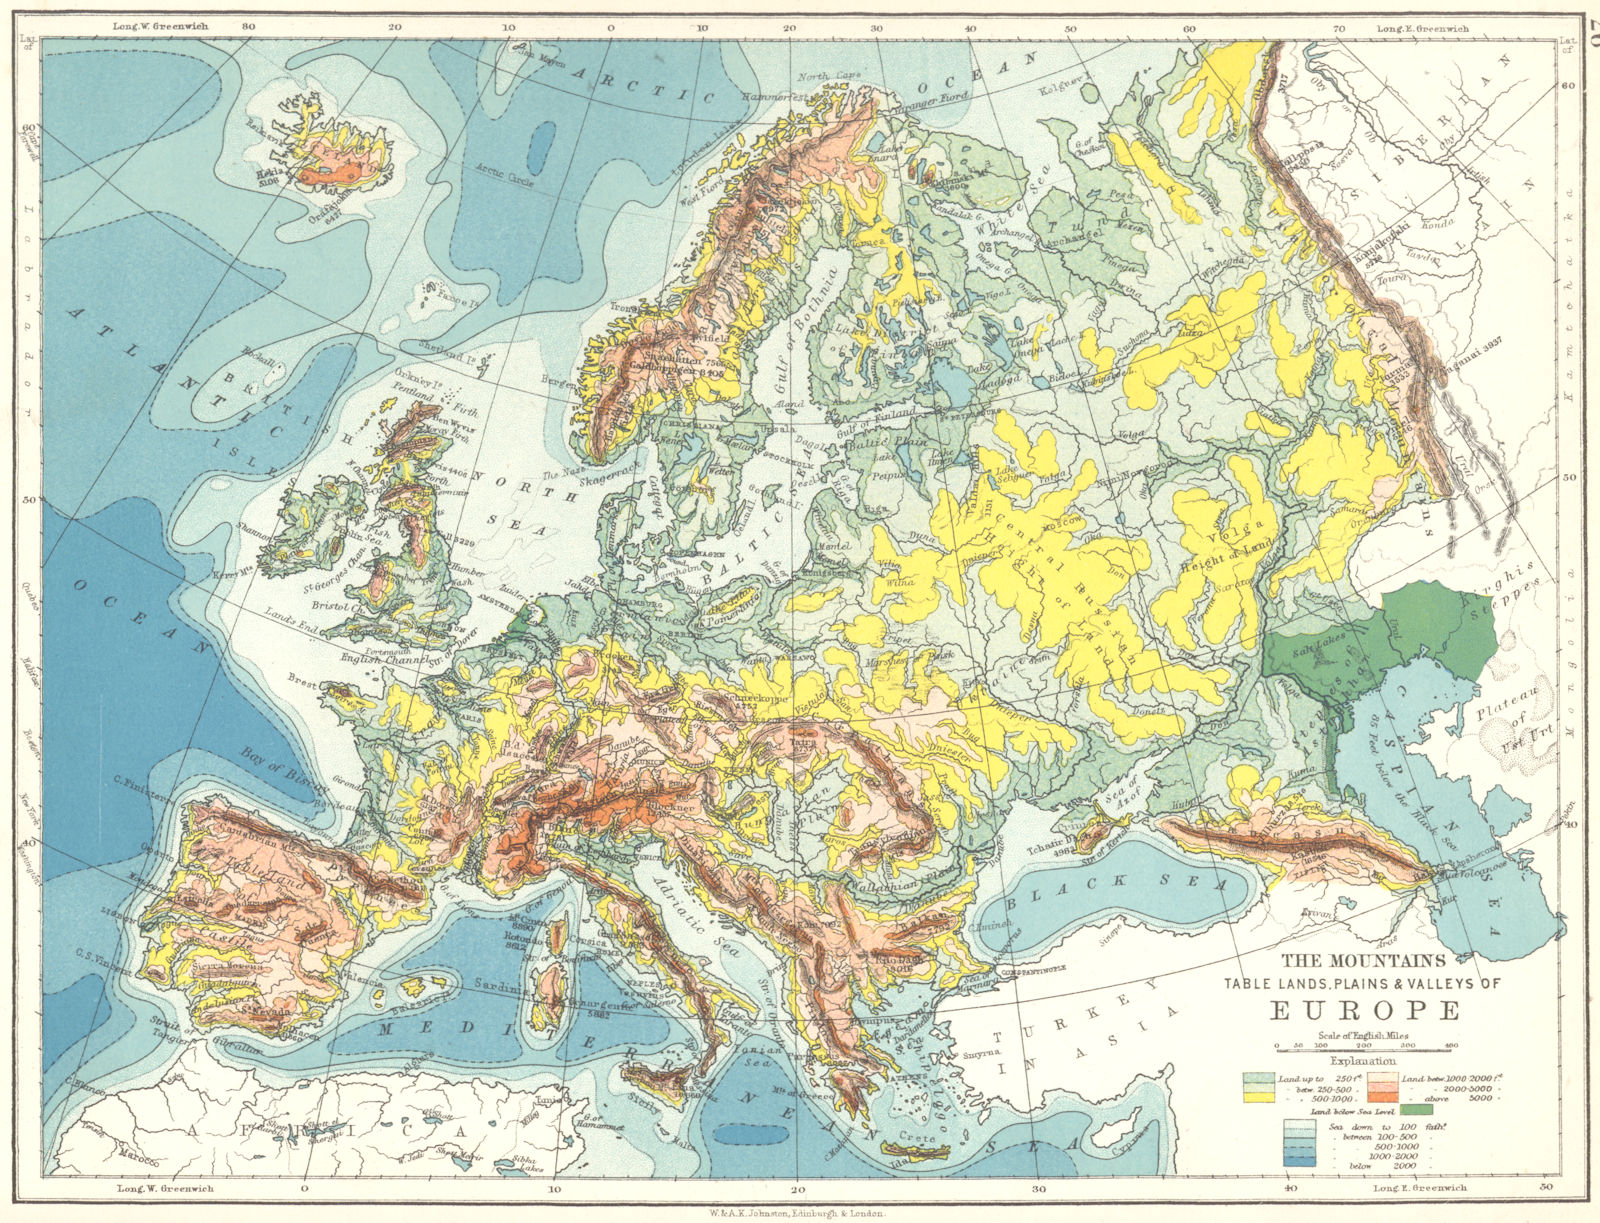 EUROPE. The mountains table lands, plains & valleys of Europe 1897 old map